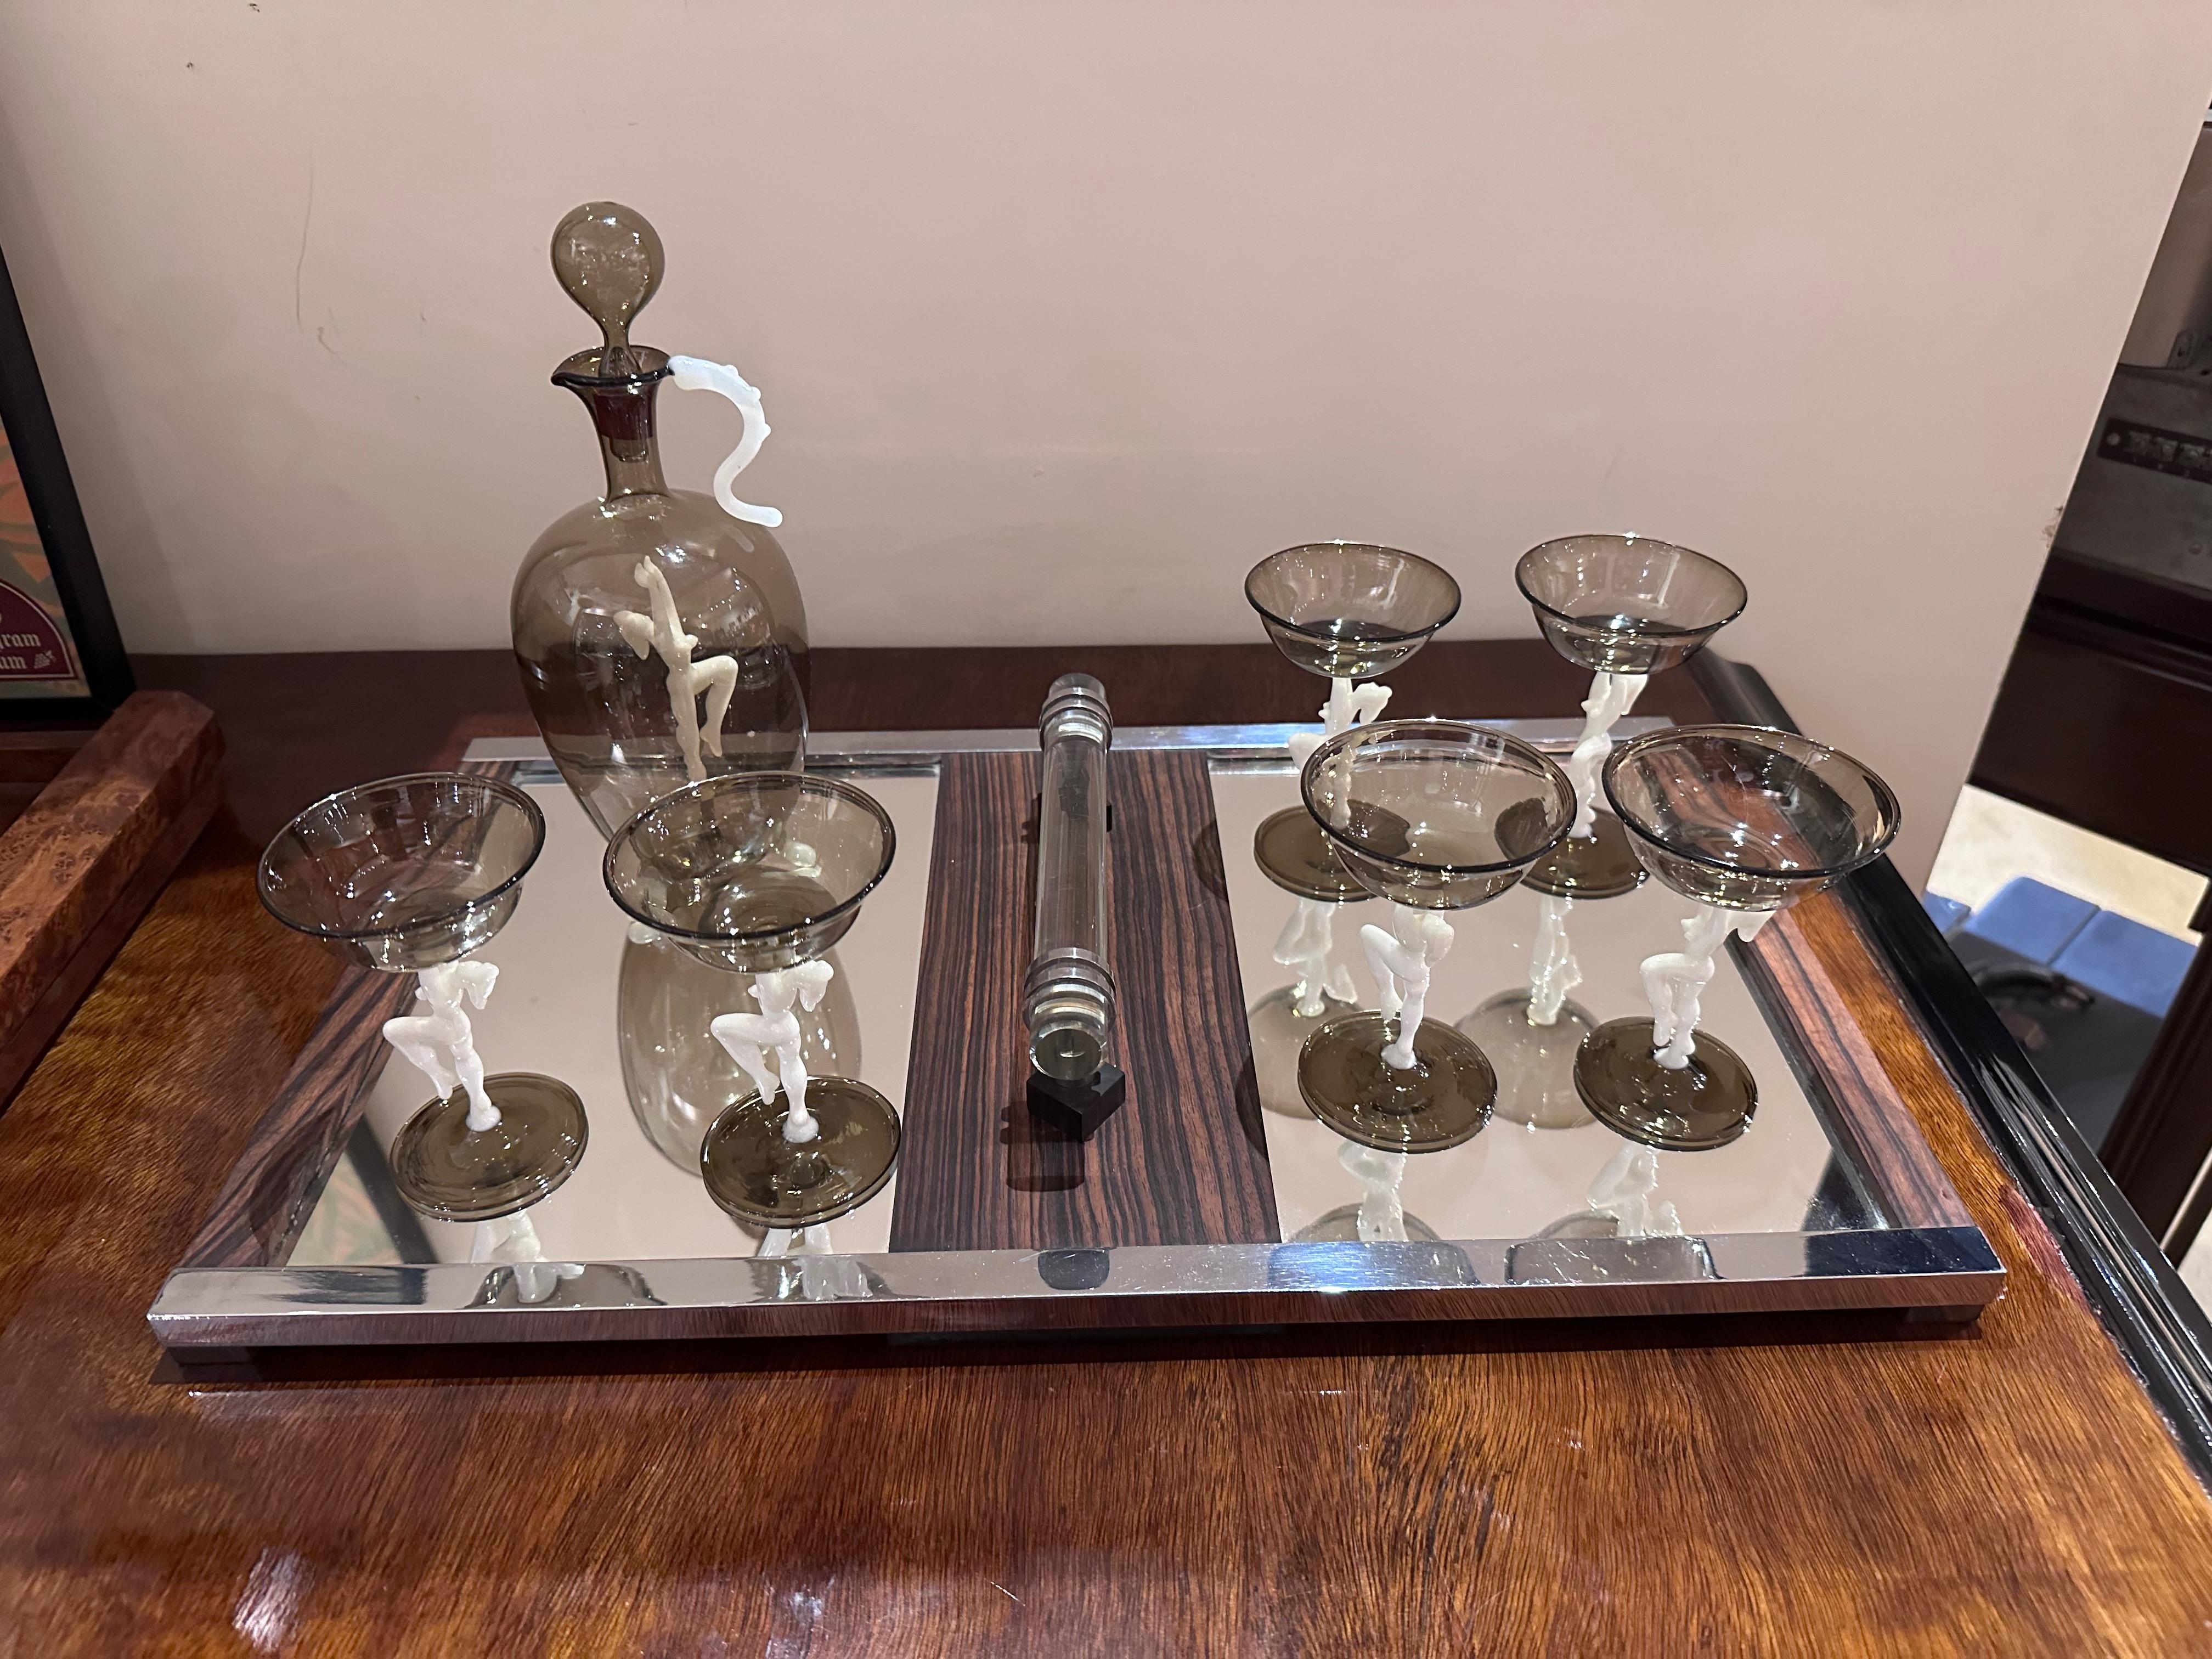 Bimini (Vienna) Complete Liqueur Set – Original Decanter and 6 Matching Glasses featuring Dancer/Nude Figures, Rare Find. This set is crafted from walled brown and opaque white hand-blown glass. The carafe includes a white inner figure and the